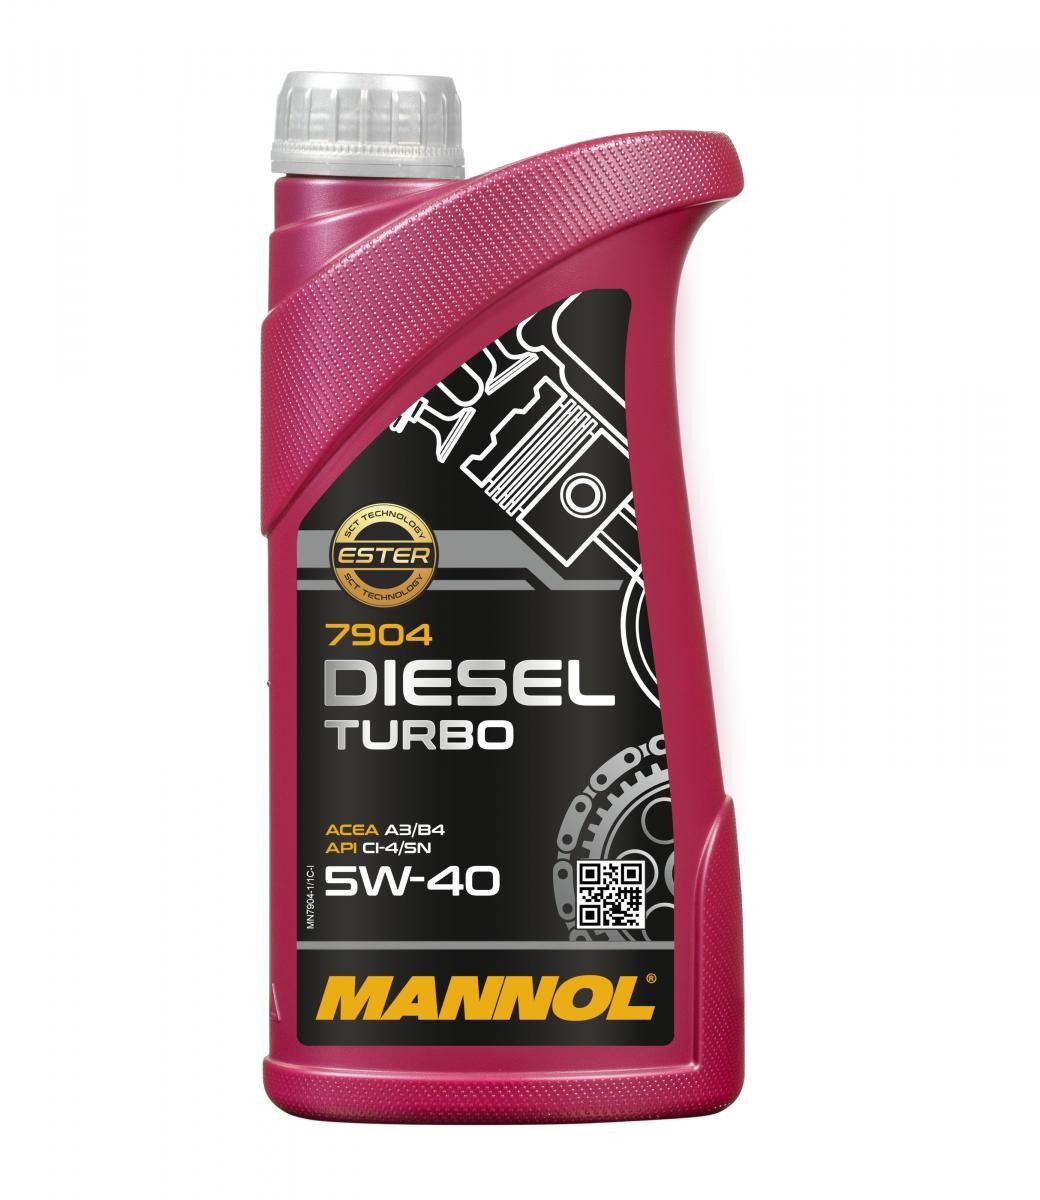 Engine oil MN7904-1 MANNOL DIESEL TURBO 5W-40, 1l, Synthetic Oil